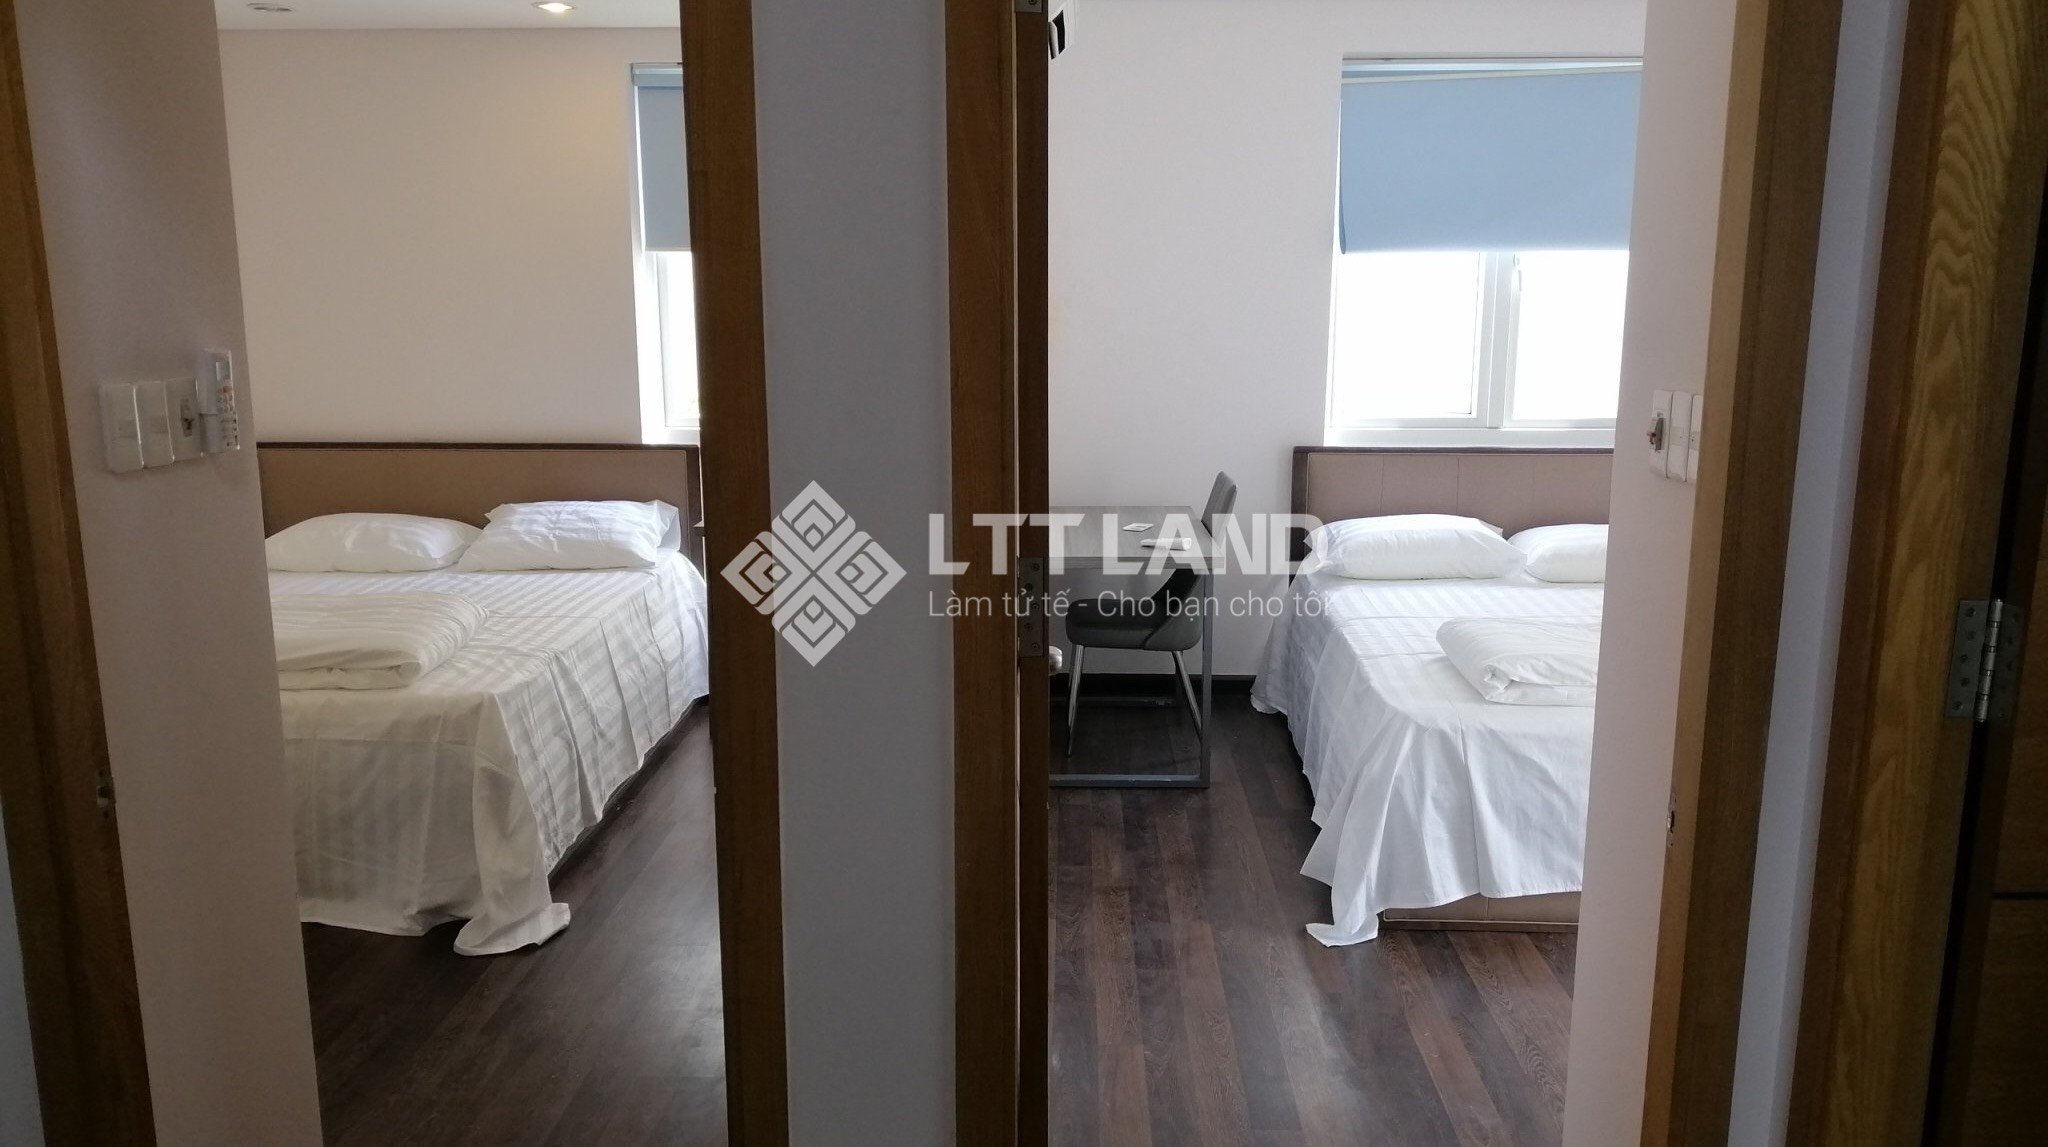 House for rent in FPT CITY DA NANG